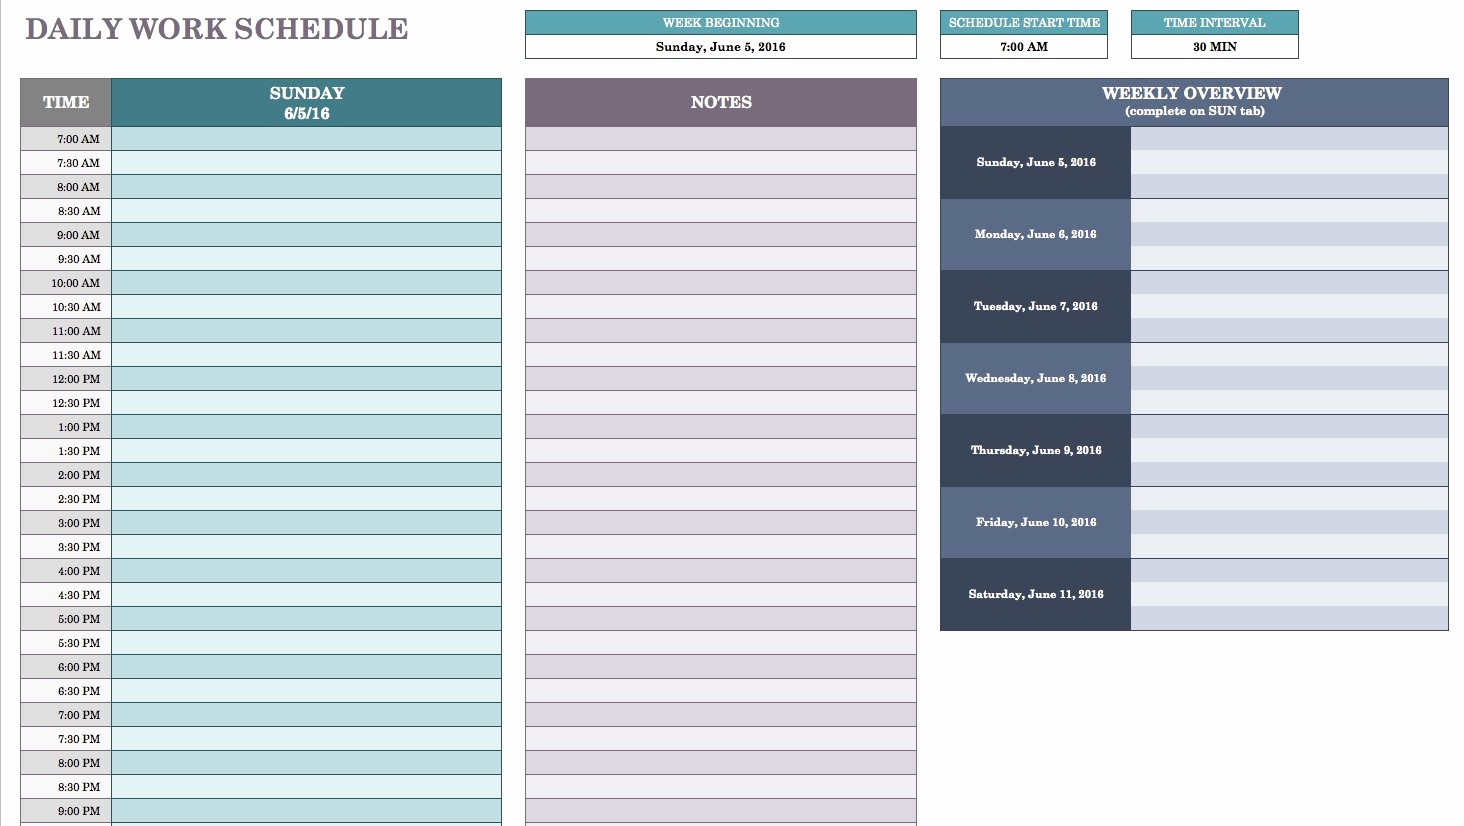 Daily Hourly Schedule Template Excel Elegant Free Daily Schedule Templates for Excel Smartsheet